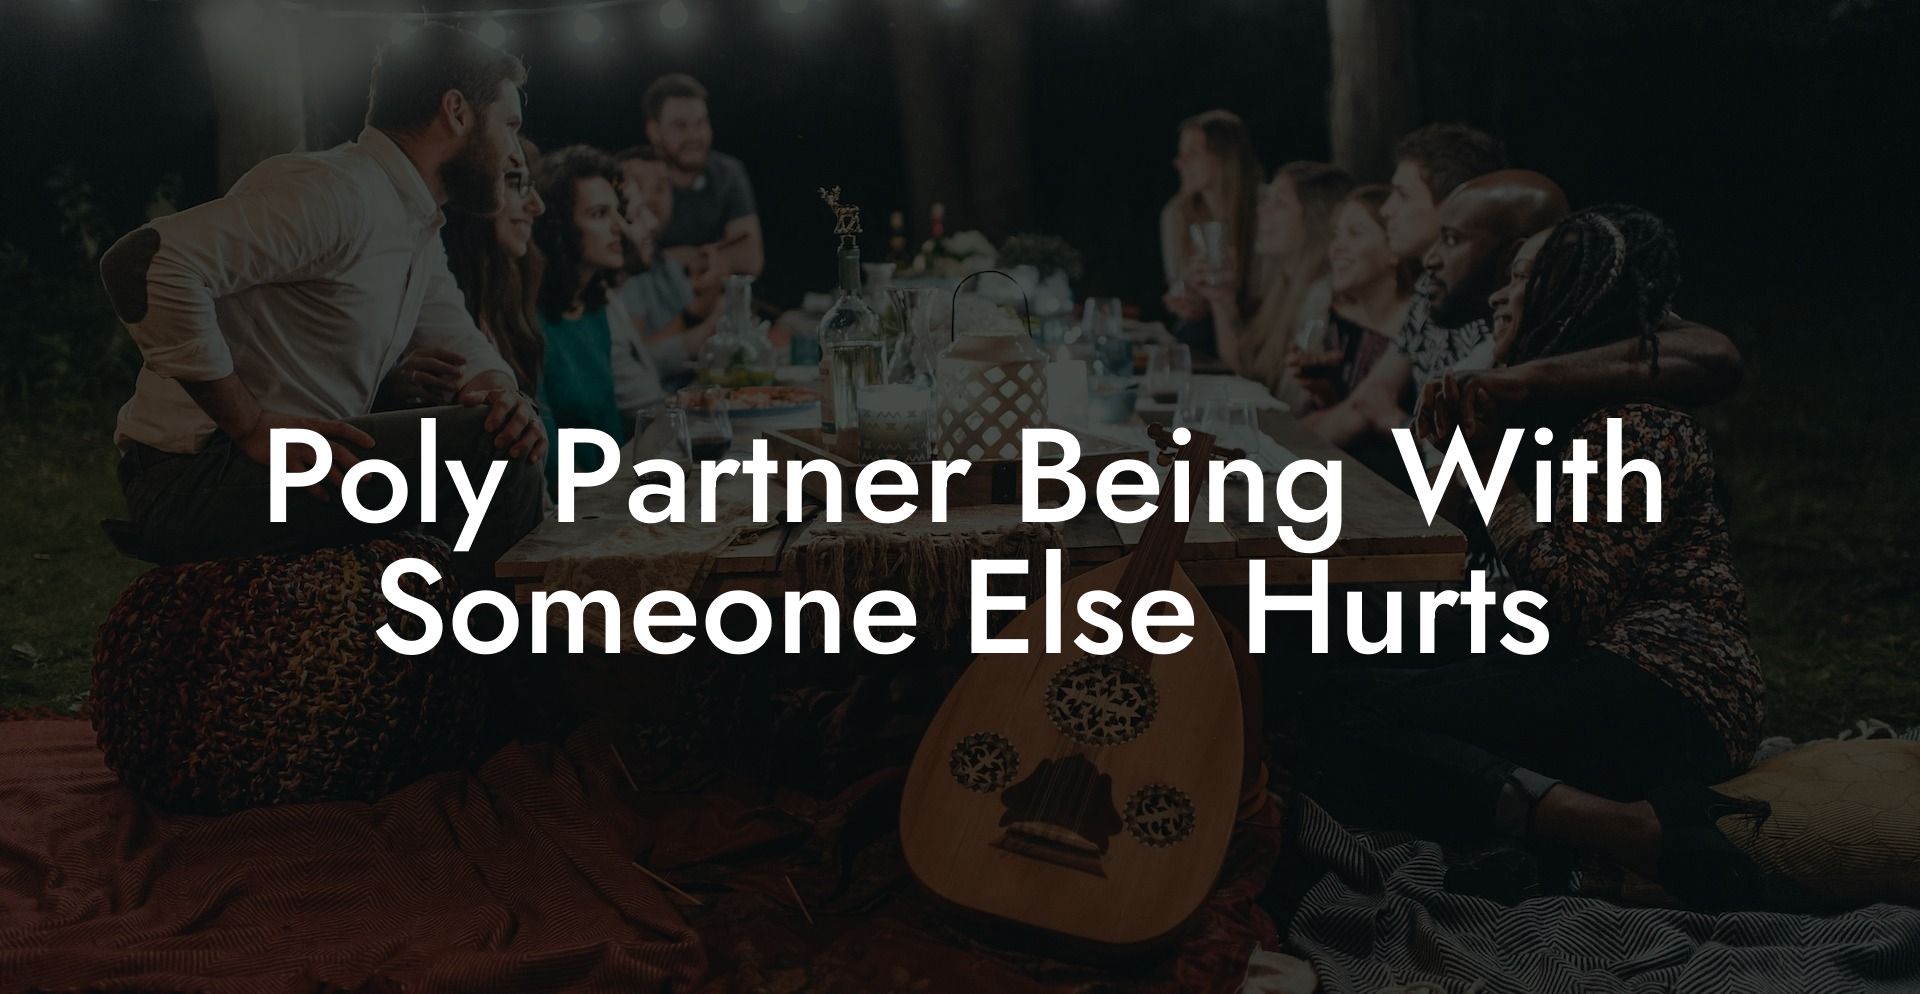 Poly Partner Being With Someone Else Hurts